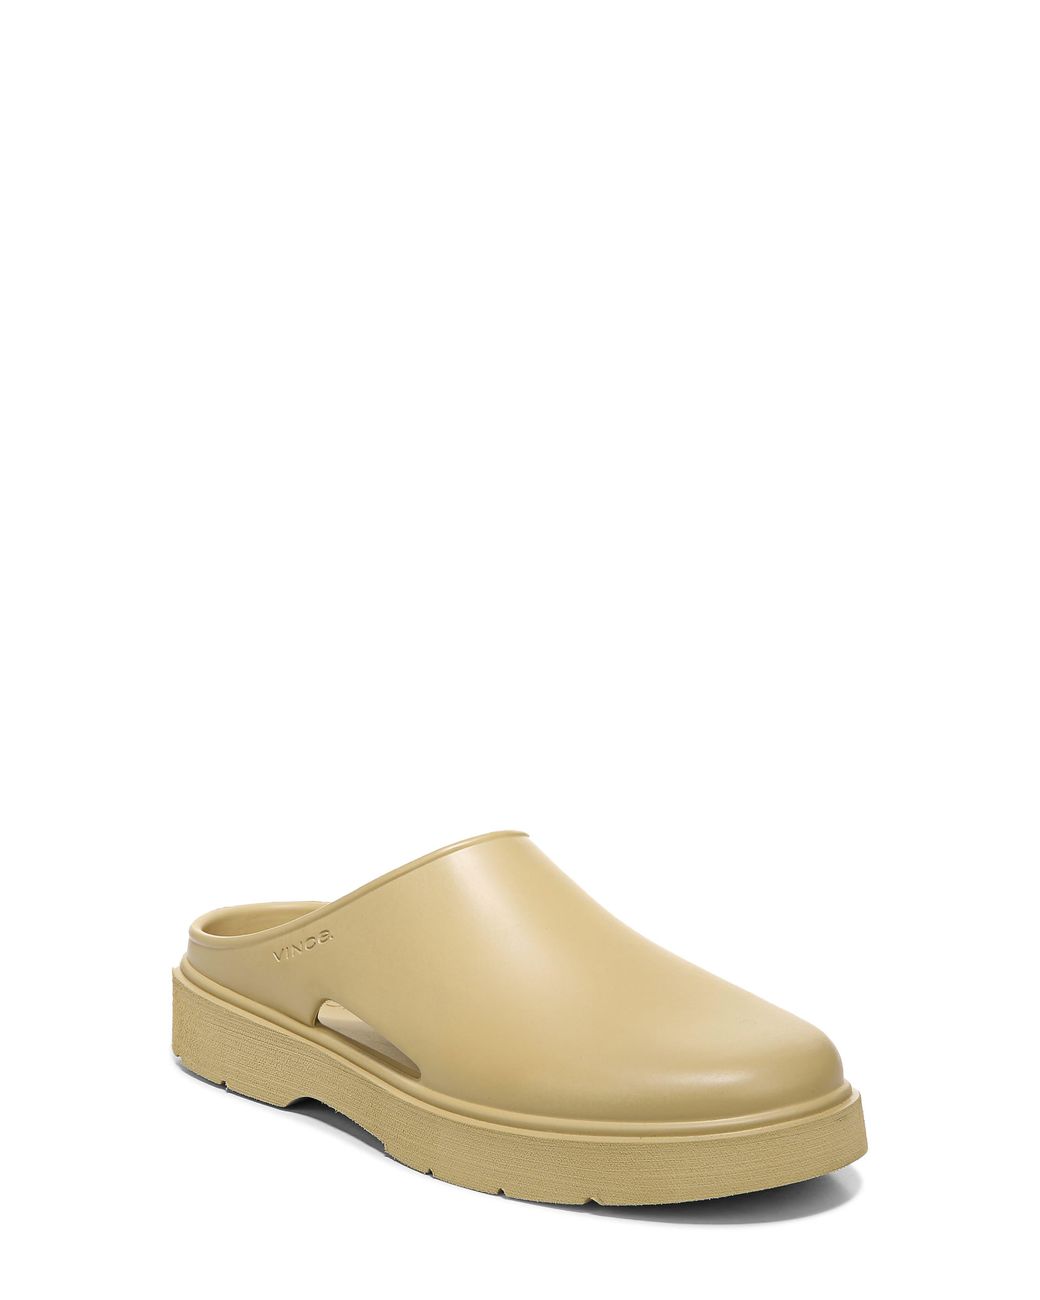 Vince Geo Clog in Natural | Lyst